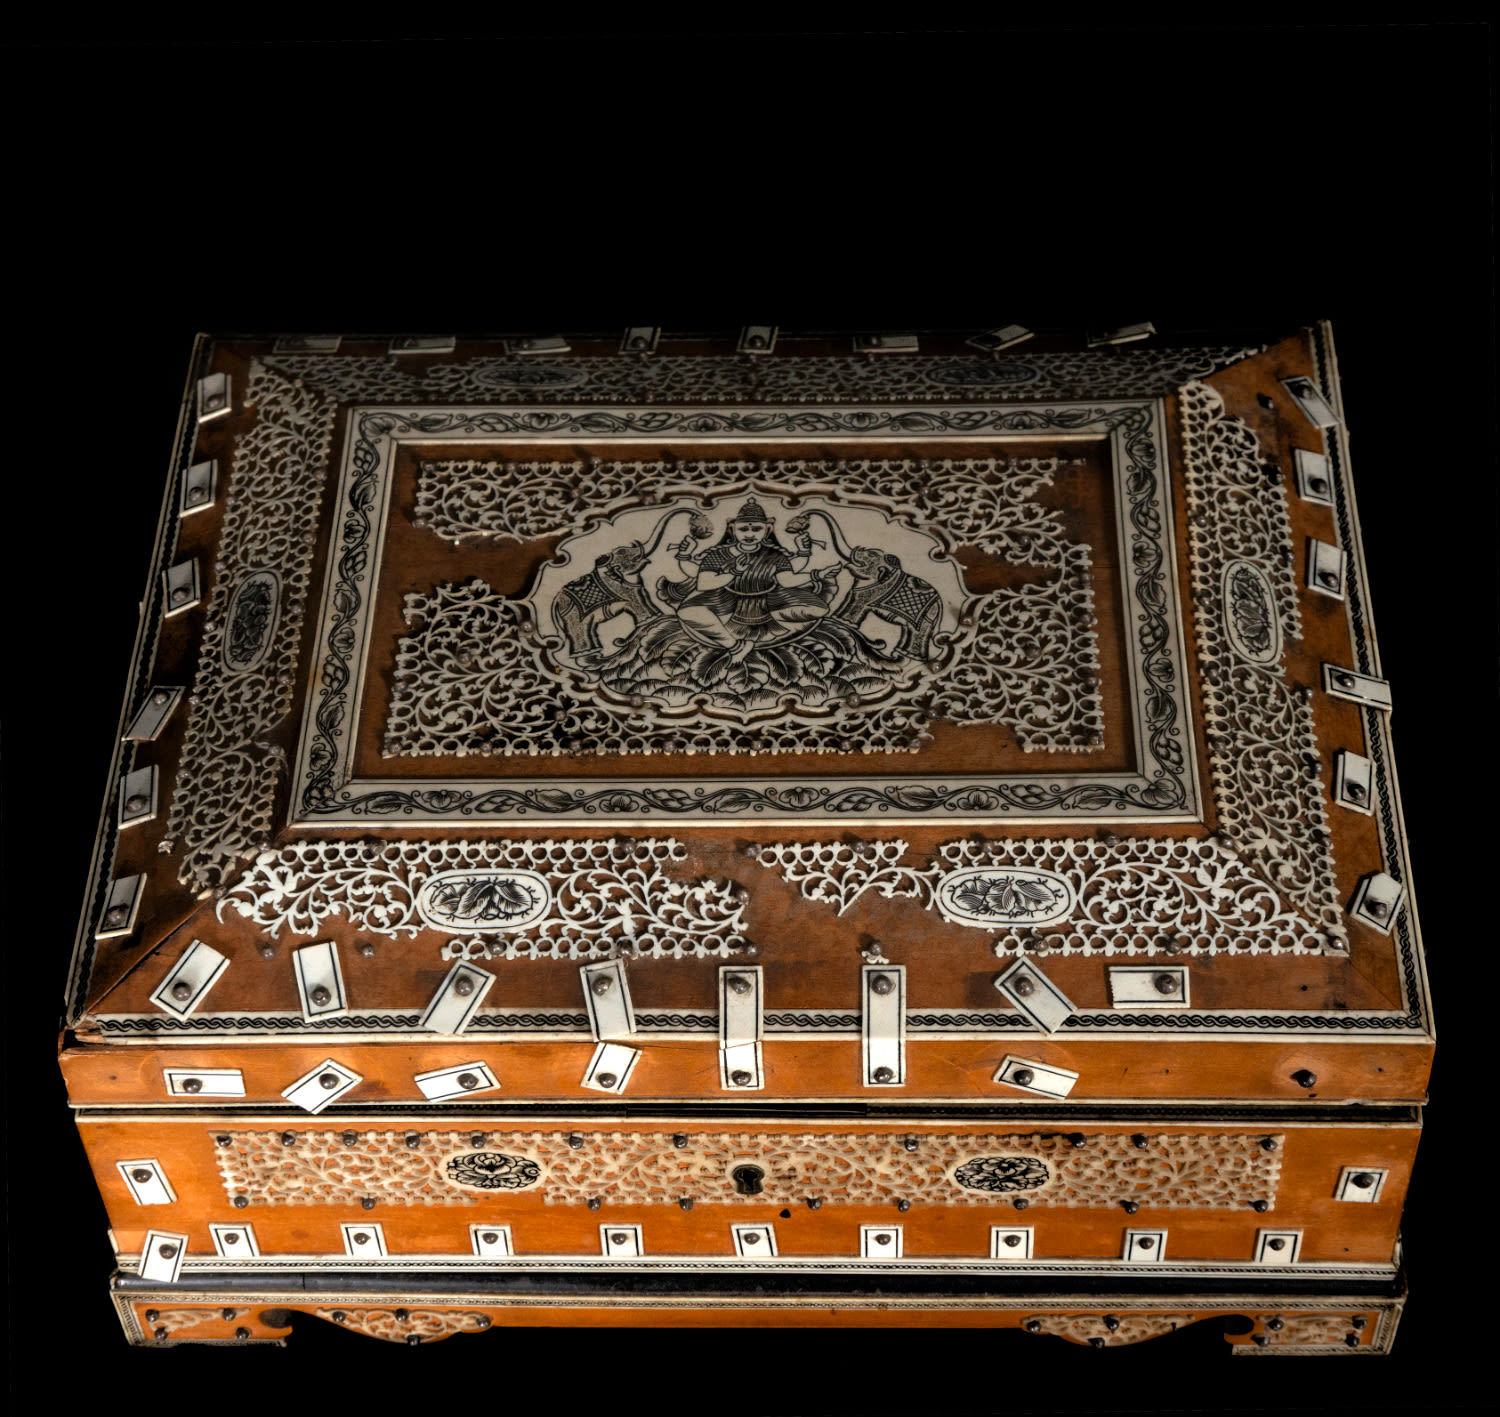 Indian tabletop chest in wood and carved bone marquetry with floral motifs, 19th century - Image 2 of 6